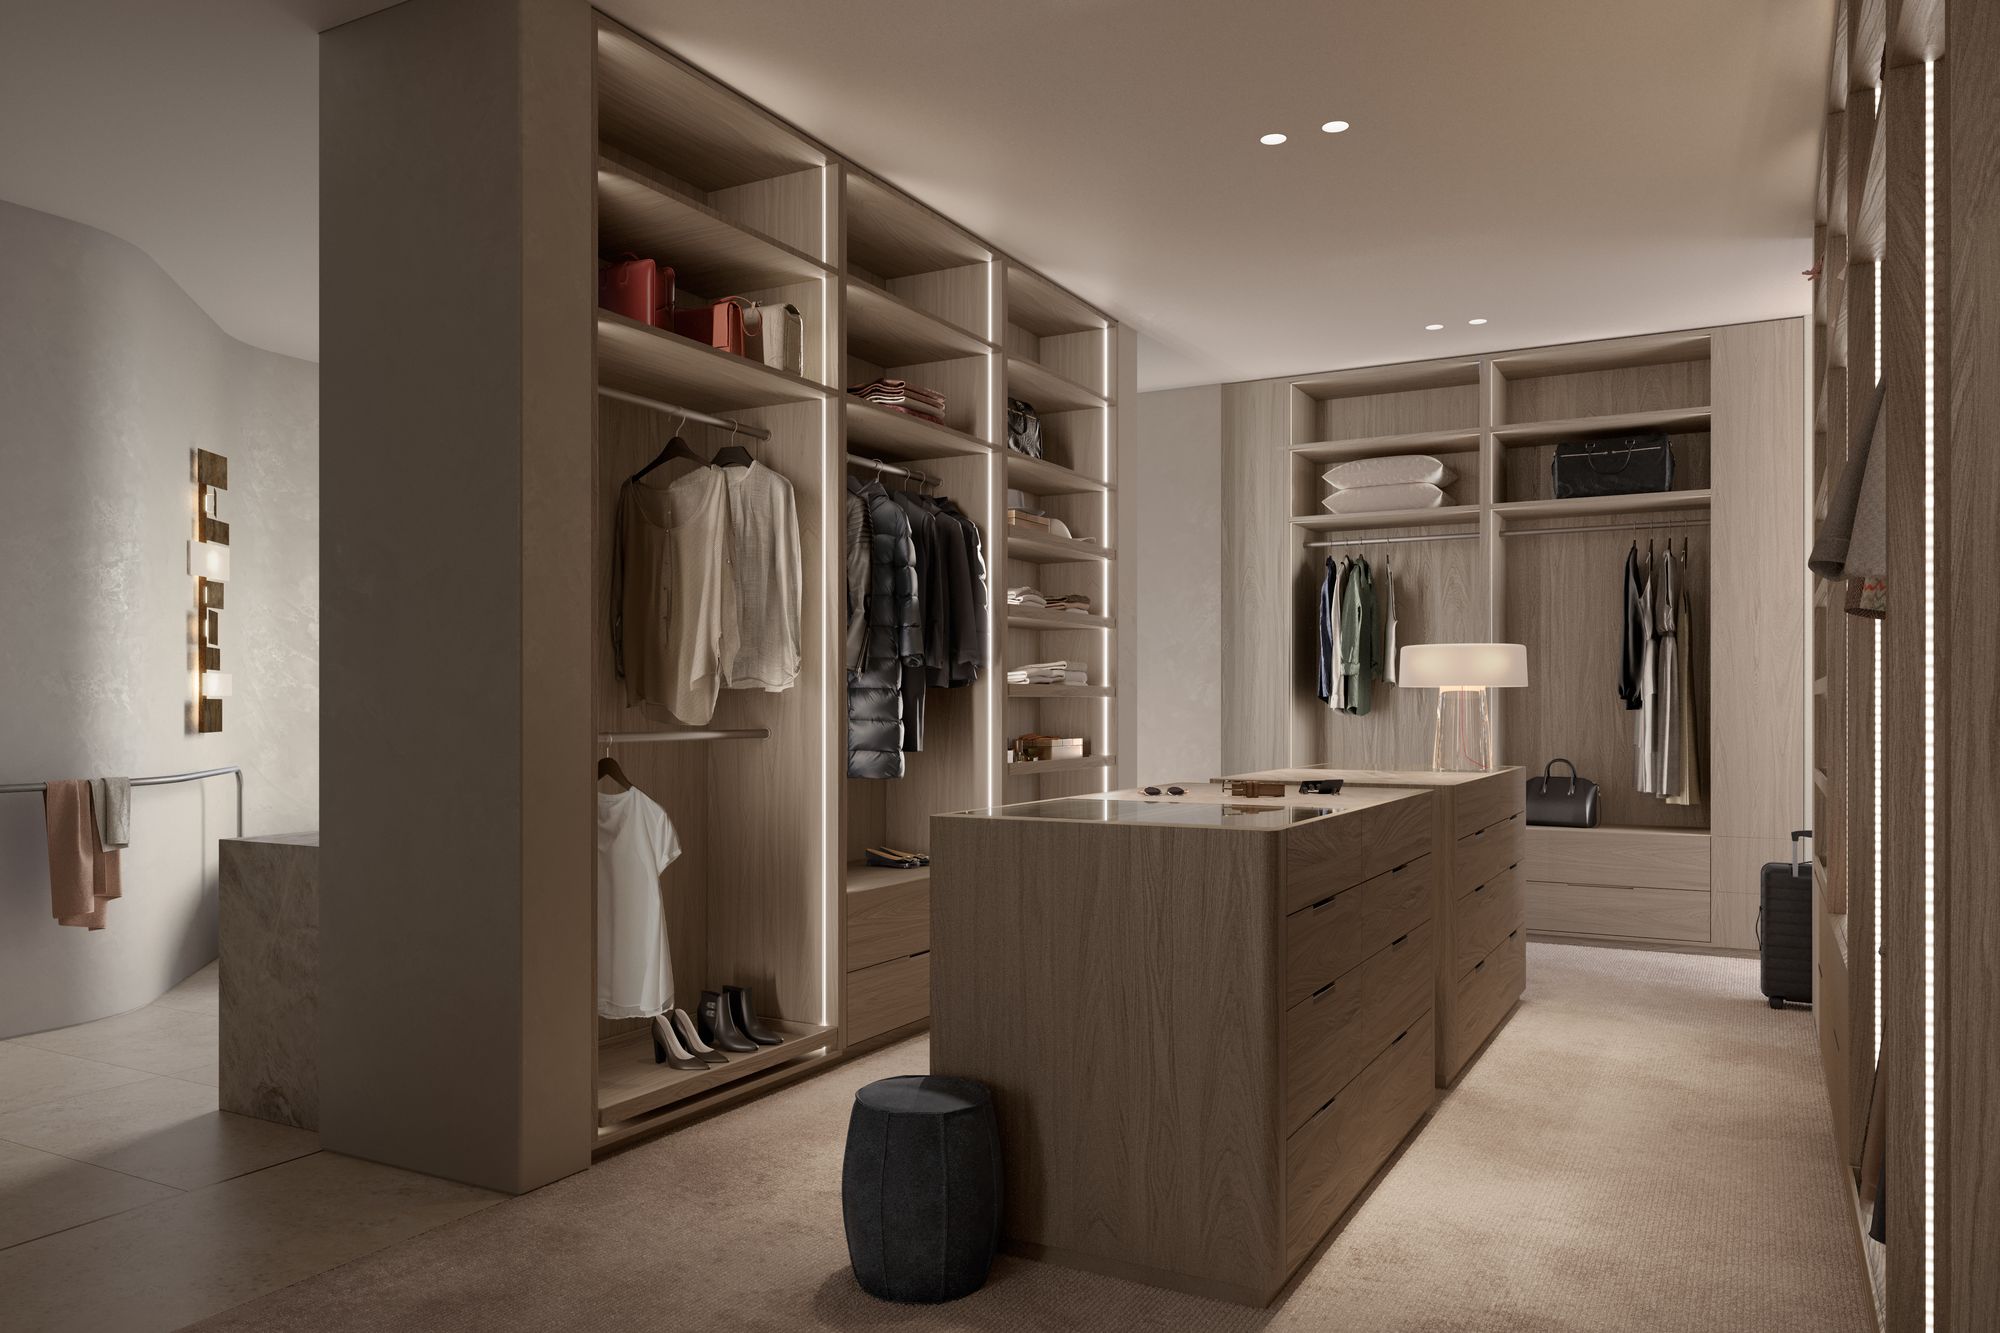 Como Toorak by Prime Edition x Jolson.This image shows a modern, well-organized walk-in closet with natural wood tones and soft lighting, creating a warm and luxurious atmosphere. The space is designed with ample shelving and hanging areas for clothes, an island dresser with drawers for additional storage, and a seated pouf for comfort. Decorative elements like a stylish table lamp, wall art, and a selection of handbags and shoes add a personal touch to the space. The use of mirrors enhances the feeling of spaciousness, and the closet's open design allows for easy access and a display of the wardrobe within.